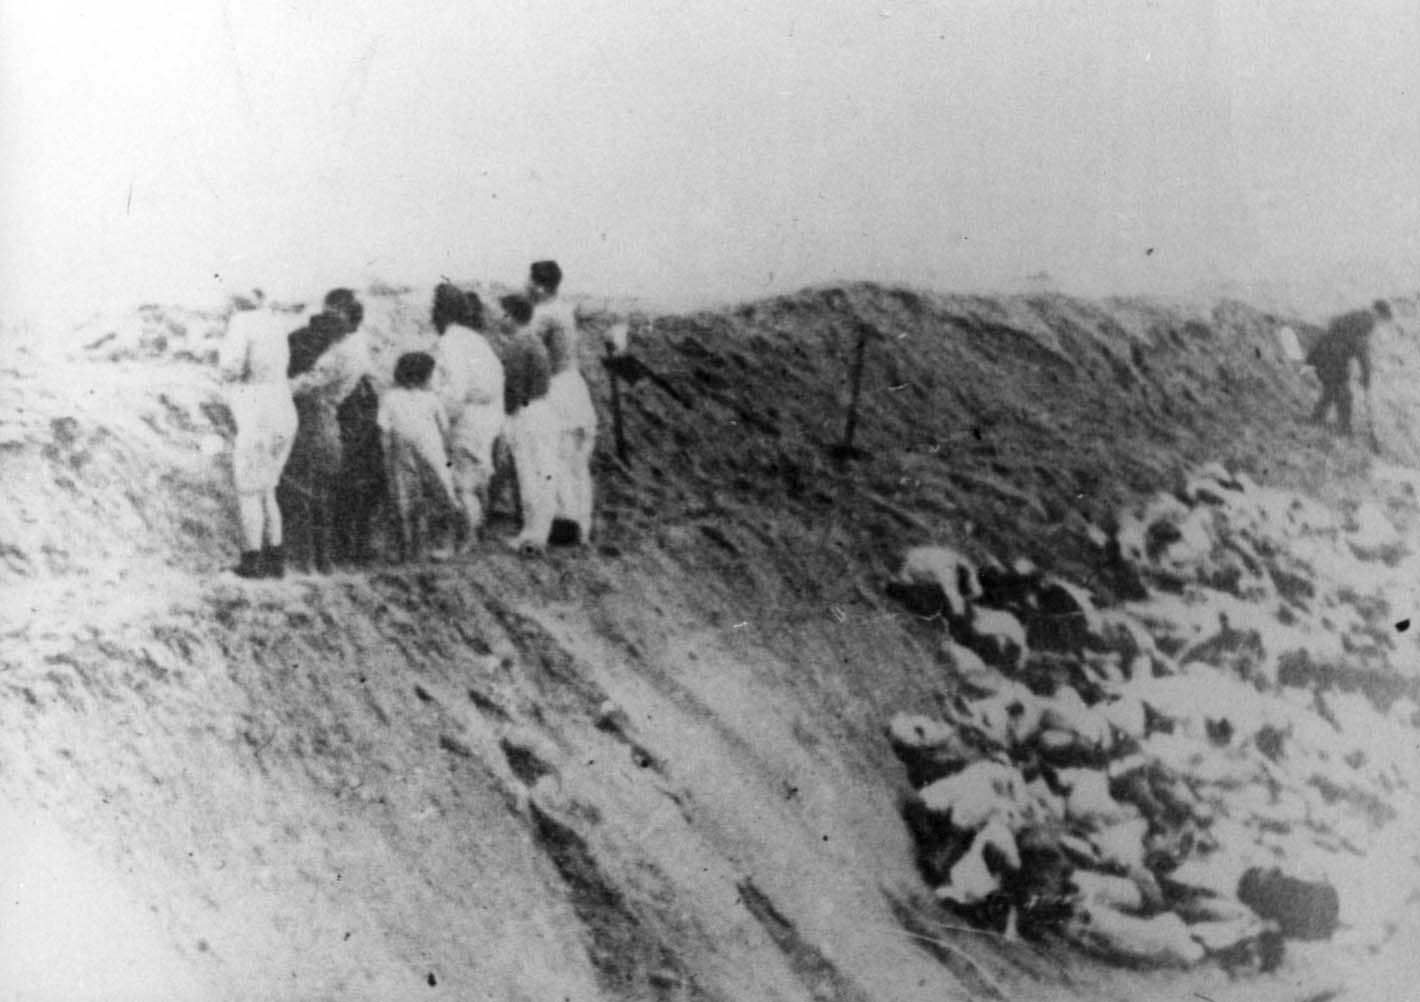 Jewish women and children from Liepaja stand on the edge of a pit before being murdered, December 15, 1941